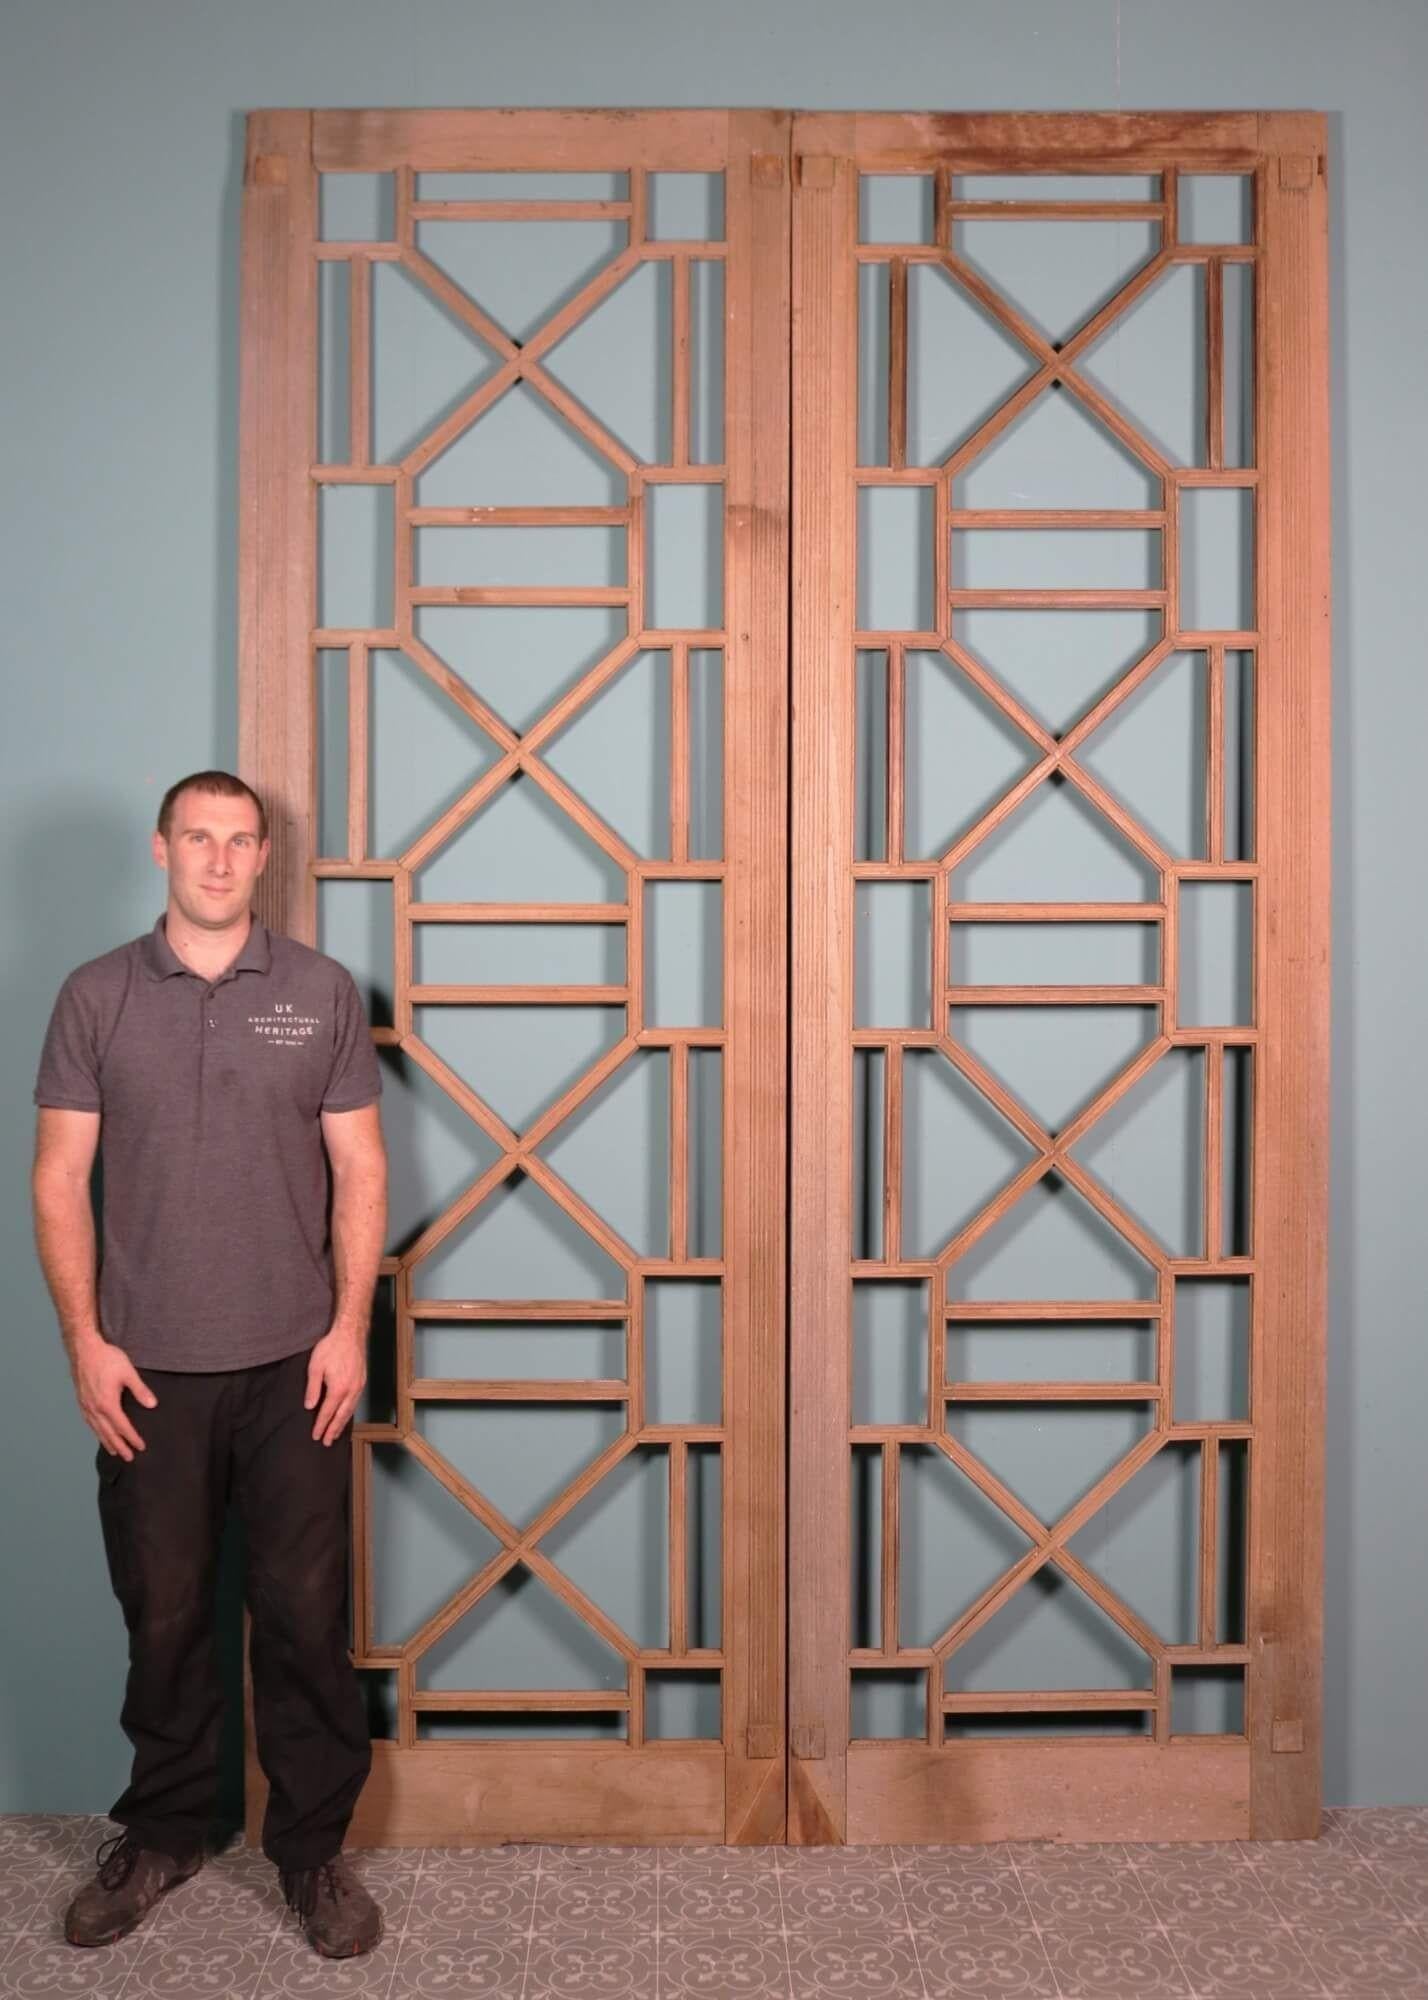 This set of tall mahogany Art Deco double doors were originally a pair of fixed panels either side of an entranceway. Unglazed, they date from the 1930s at the height of the Art Deco era and showcase a striking geometric design evocative of iconic